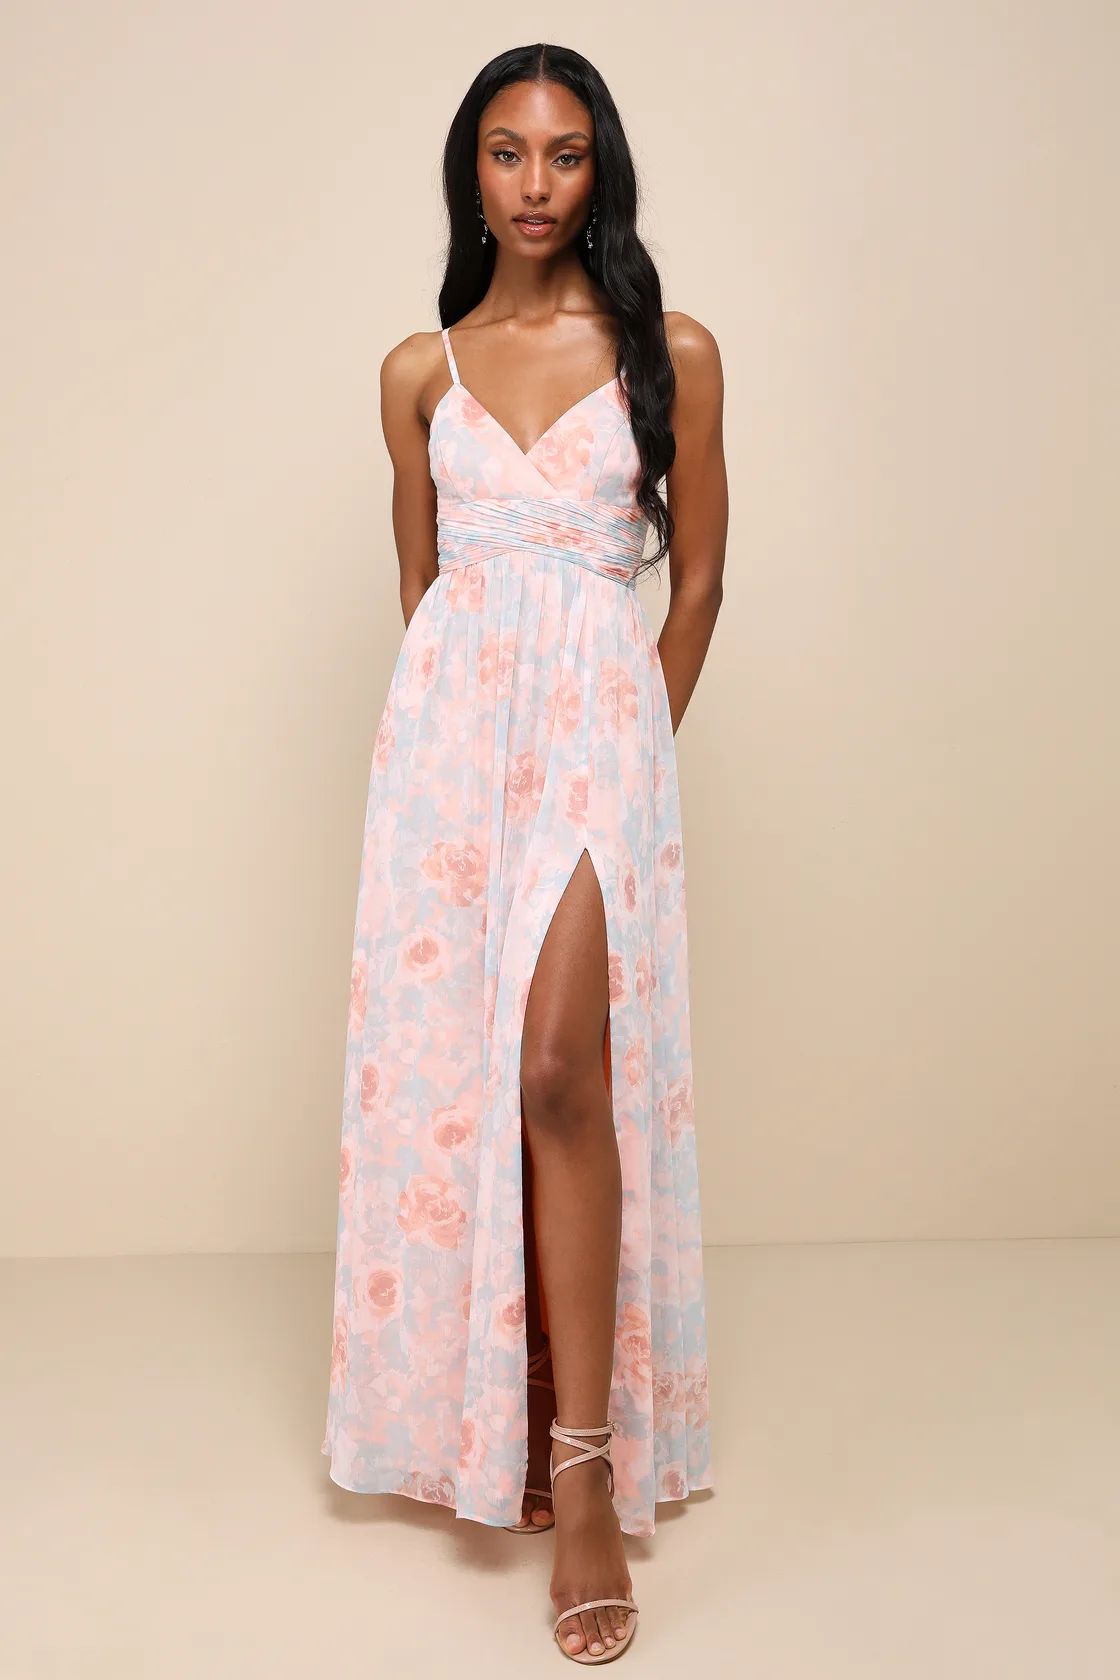 Exceptional Sweetness Peach Floral Chiffon Pleated Maxi Dress | Lulus